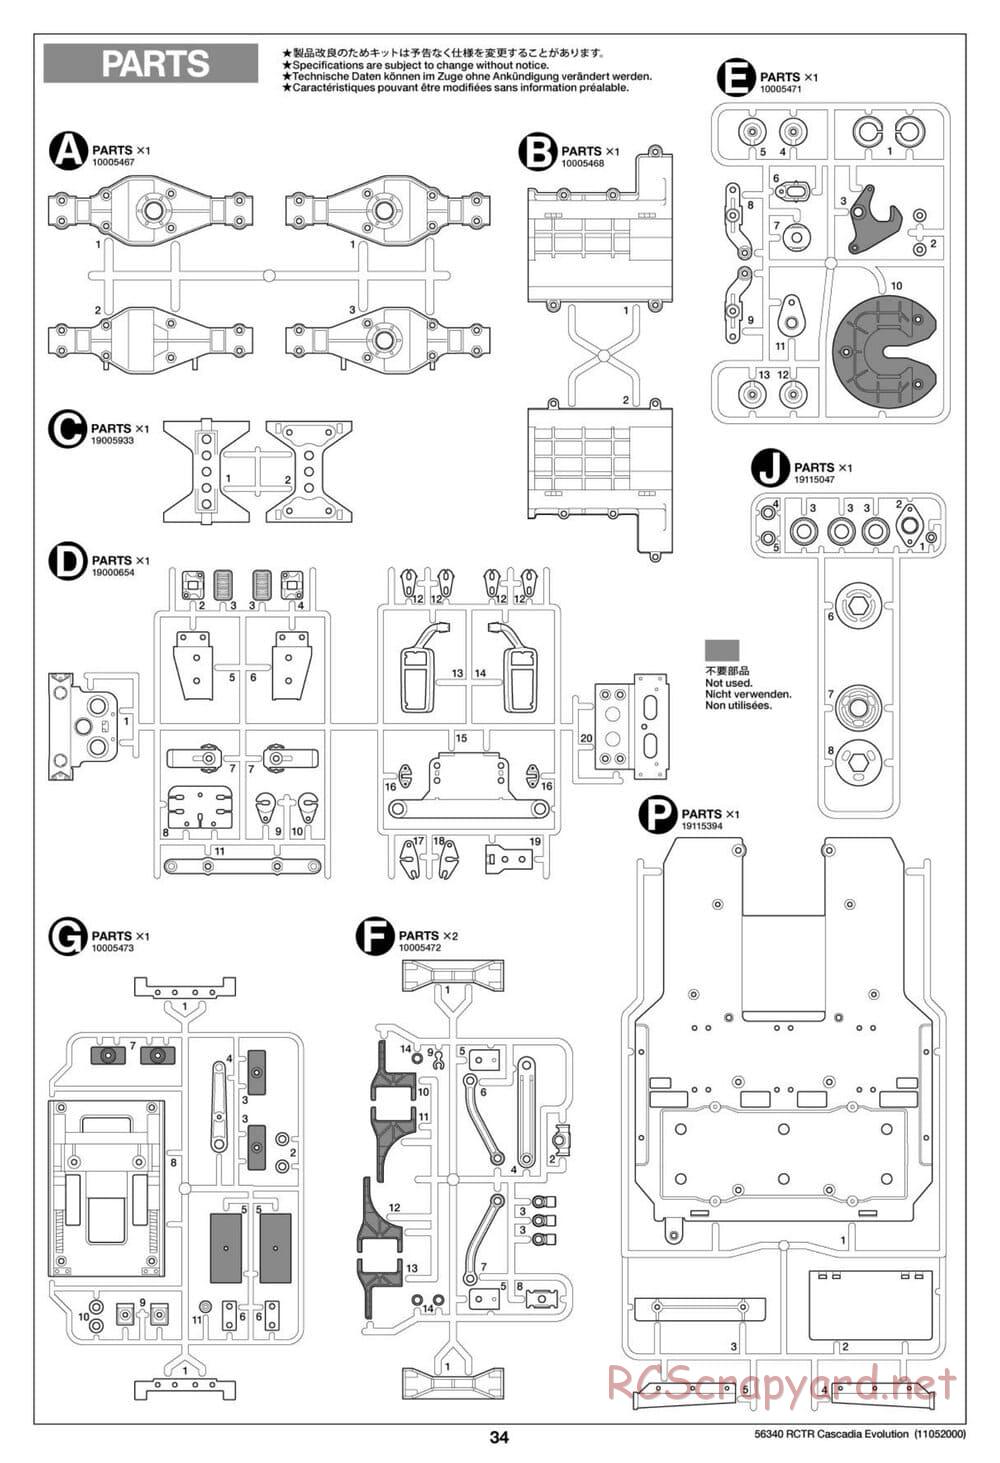 Tamiya - Freightliner Cascadia Evolution Tractor Truck Chassis - Manual - Page 34